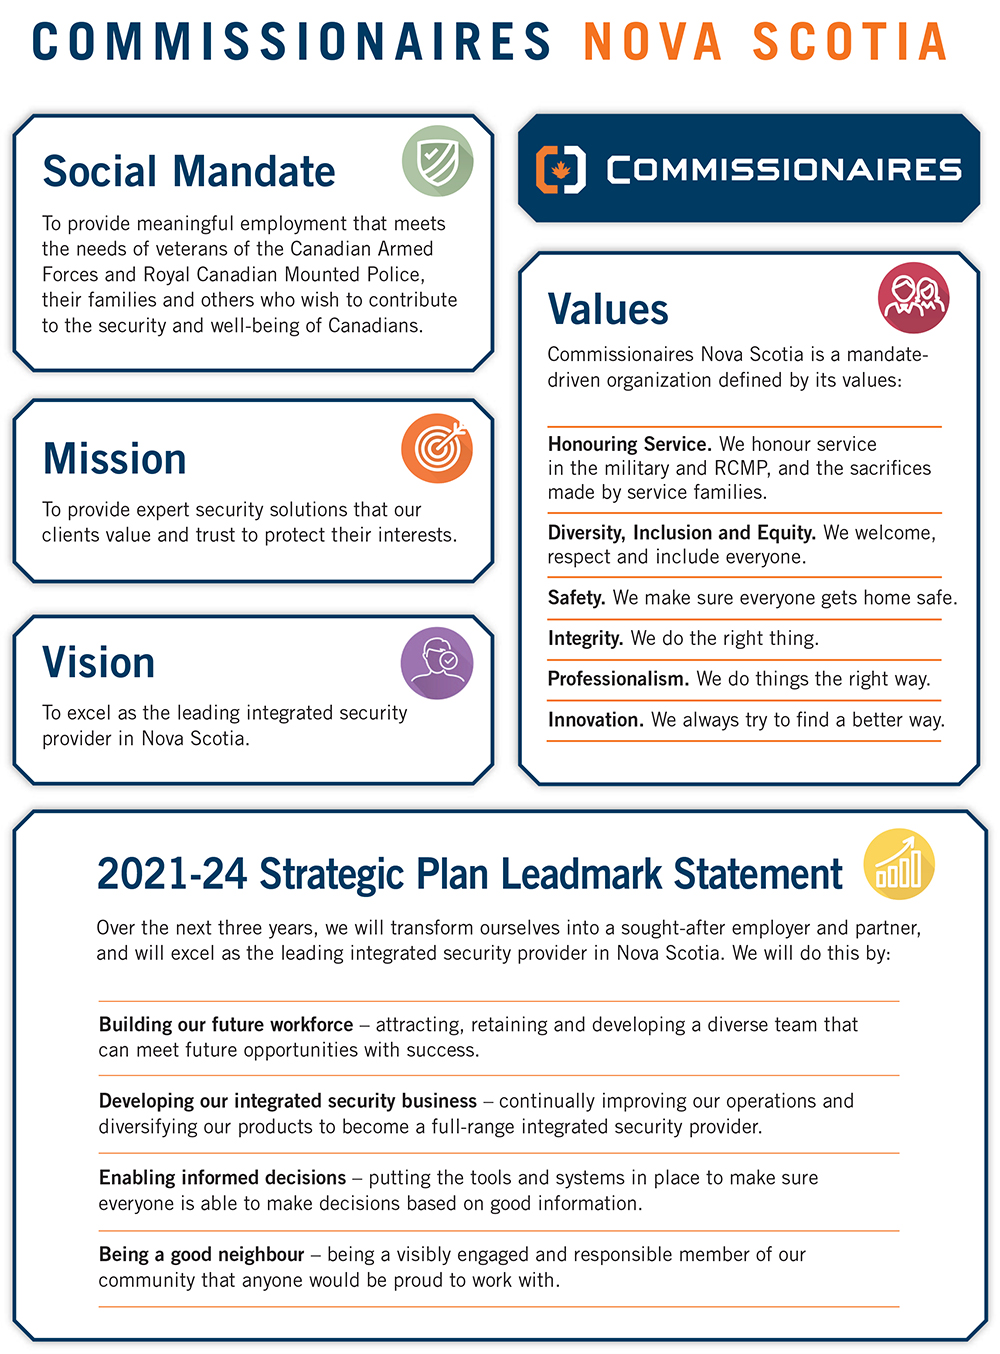 CNS Mission Vision Values Mandate and Strategic Plan Statement 2021-24